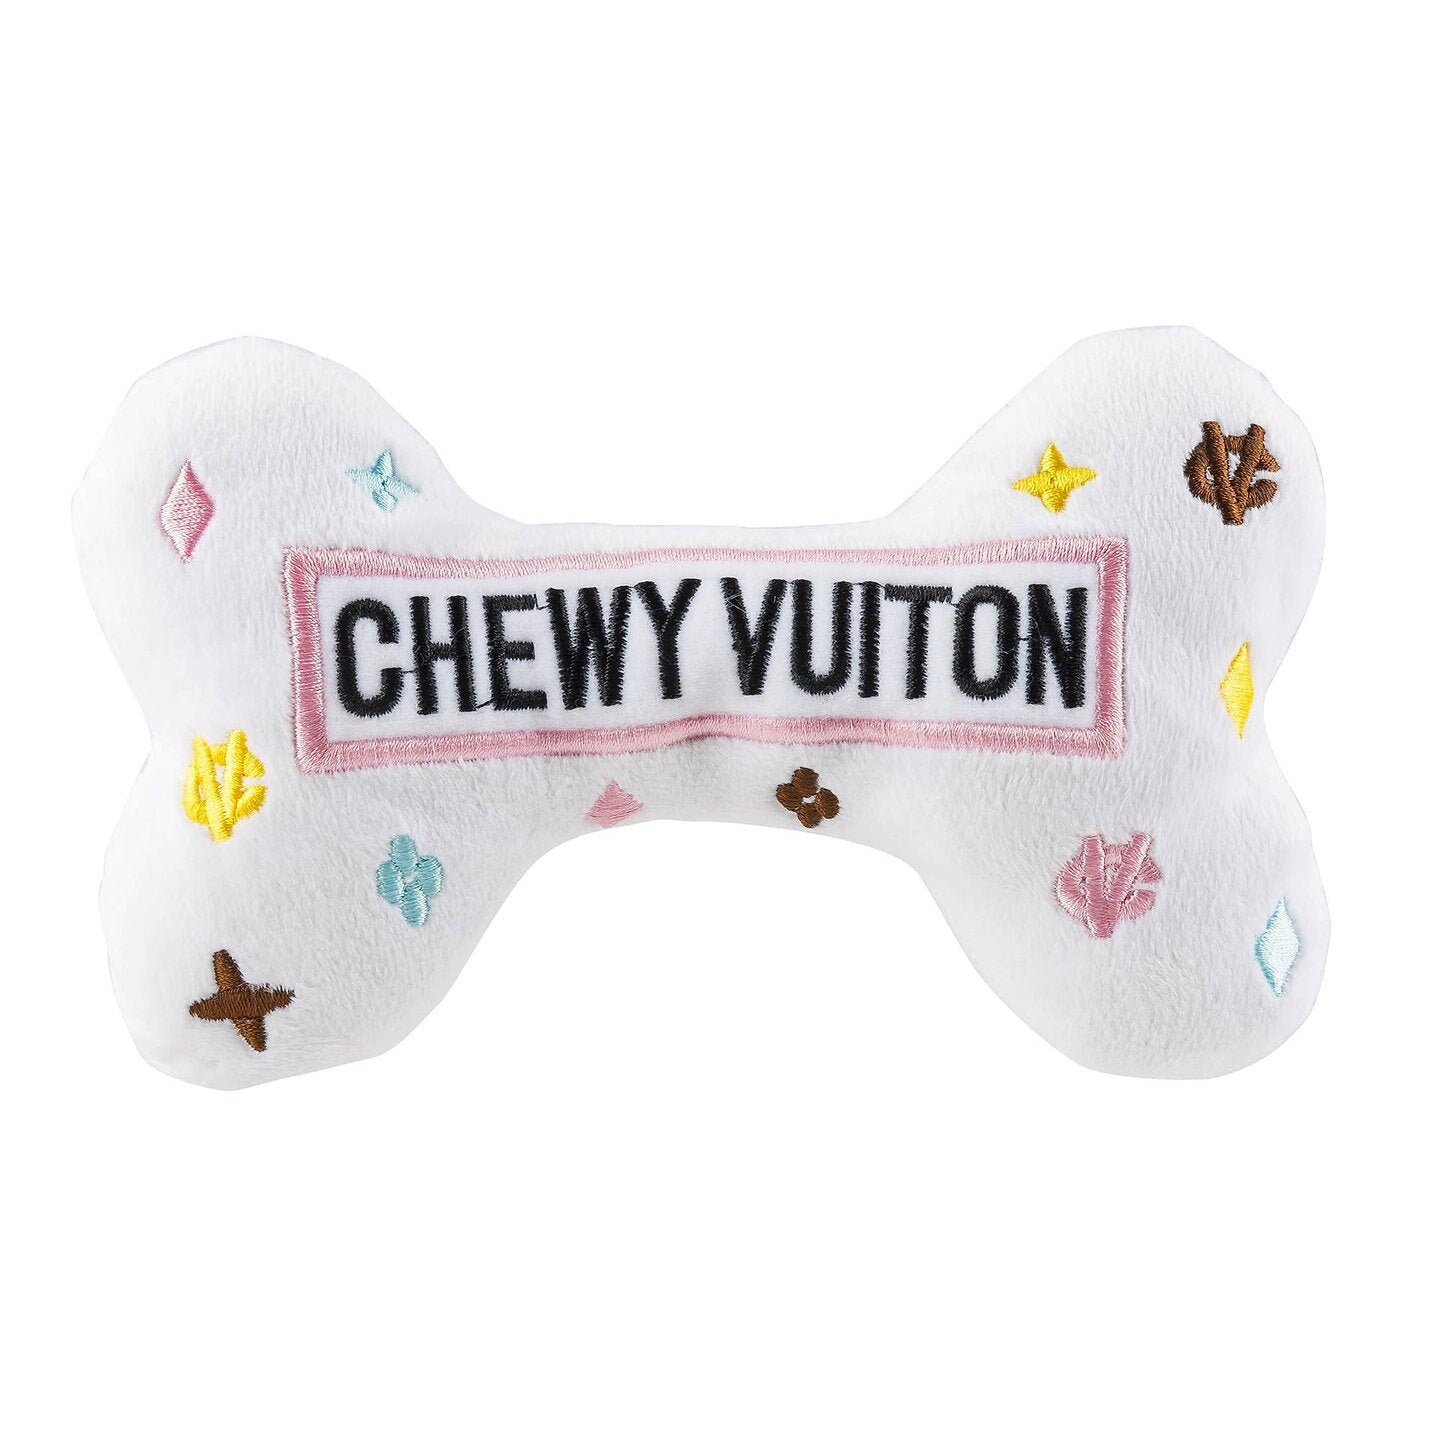 Louis Vuitton Dog Toy Chewy Vuitton Plush Dogs Gifts Purse 